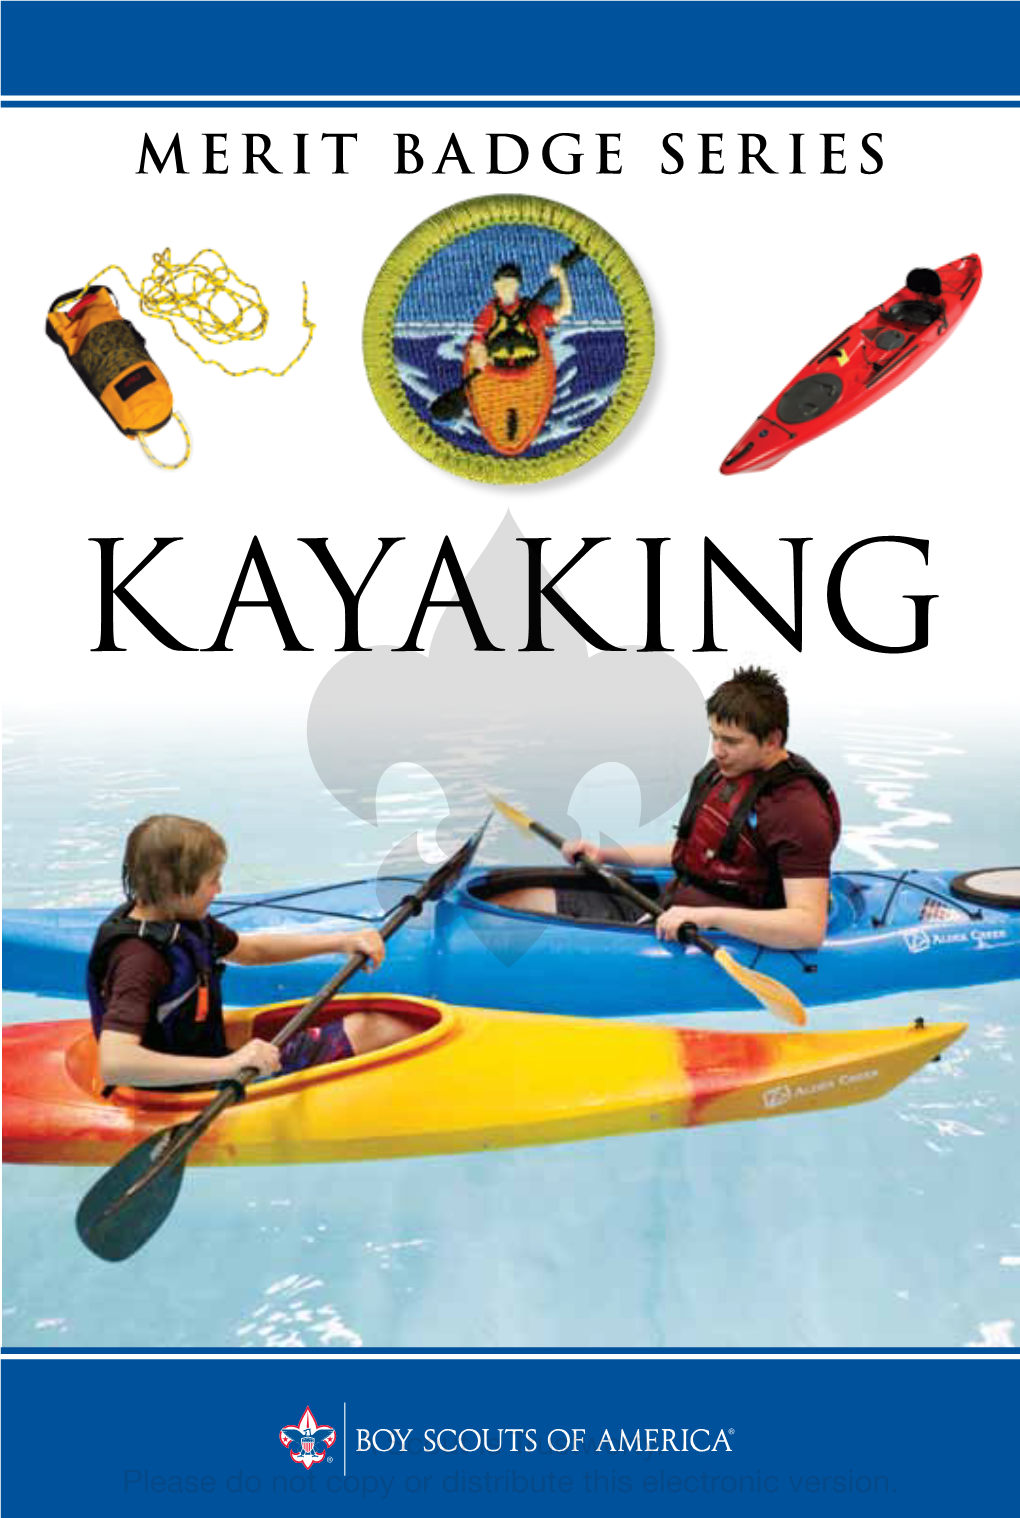 Kayaking Merit Badge Counselors May Have Formal Training in Kayaking and Paddle Craft Instruction, It Is Not Required